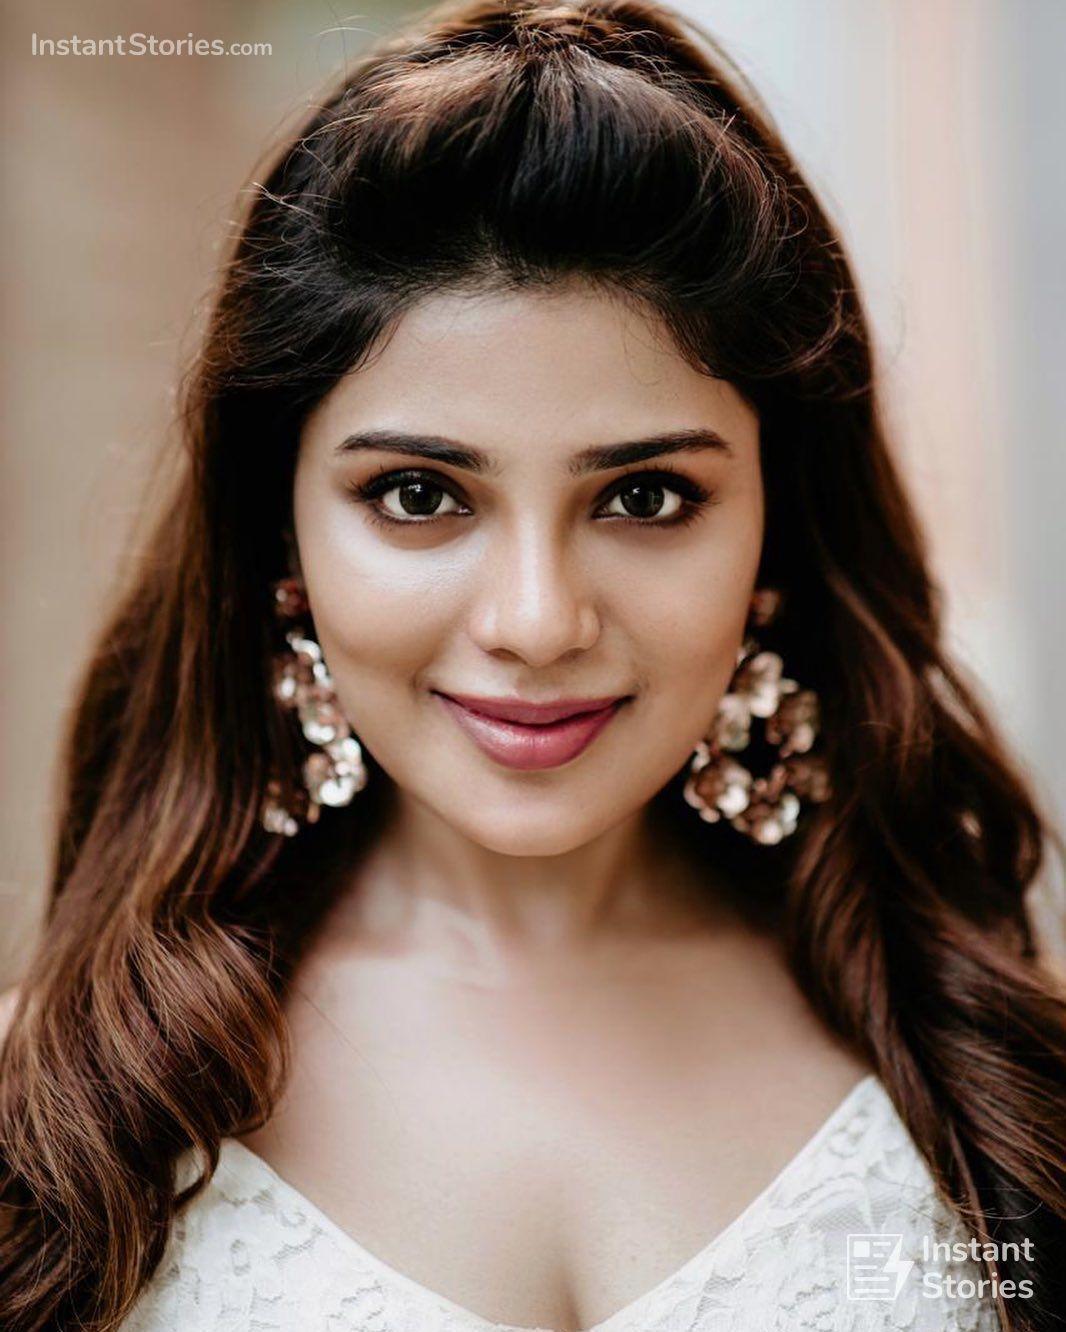 Aathmika Beautiful HD Photo & Mobile Wallpaper HD (Android IPhone) (1080p) (3362) #aathmika In 2020. Actresses, Tamil Actress, Most Beautiful Indian Actress